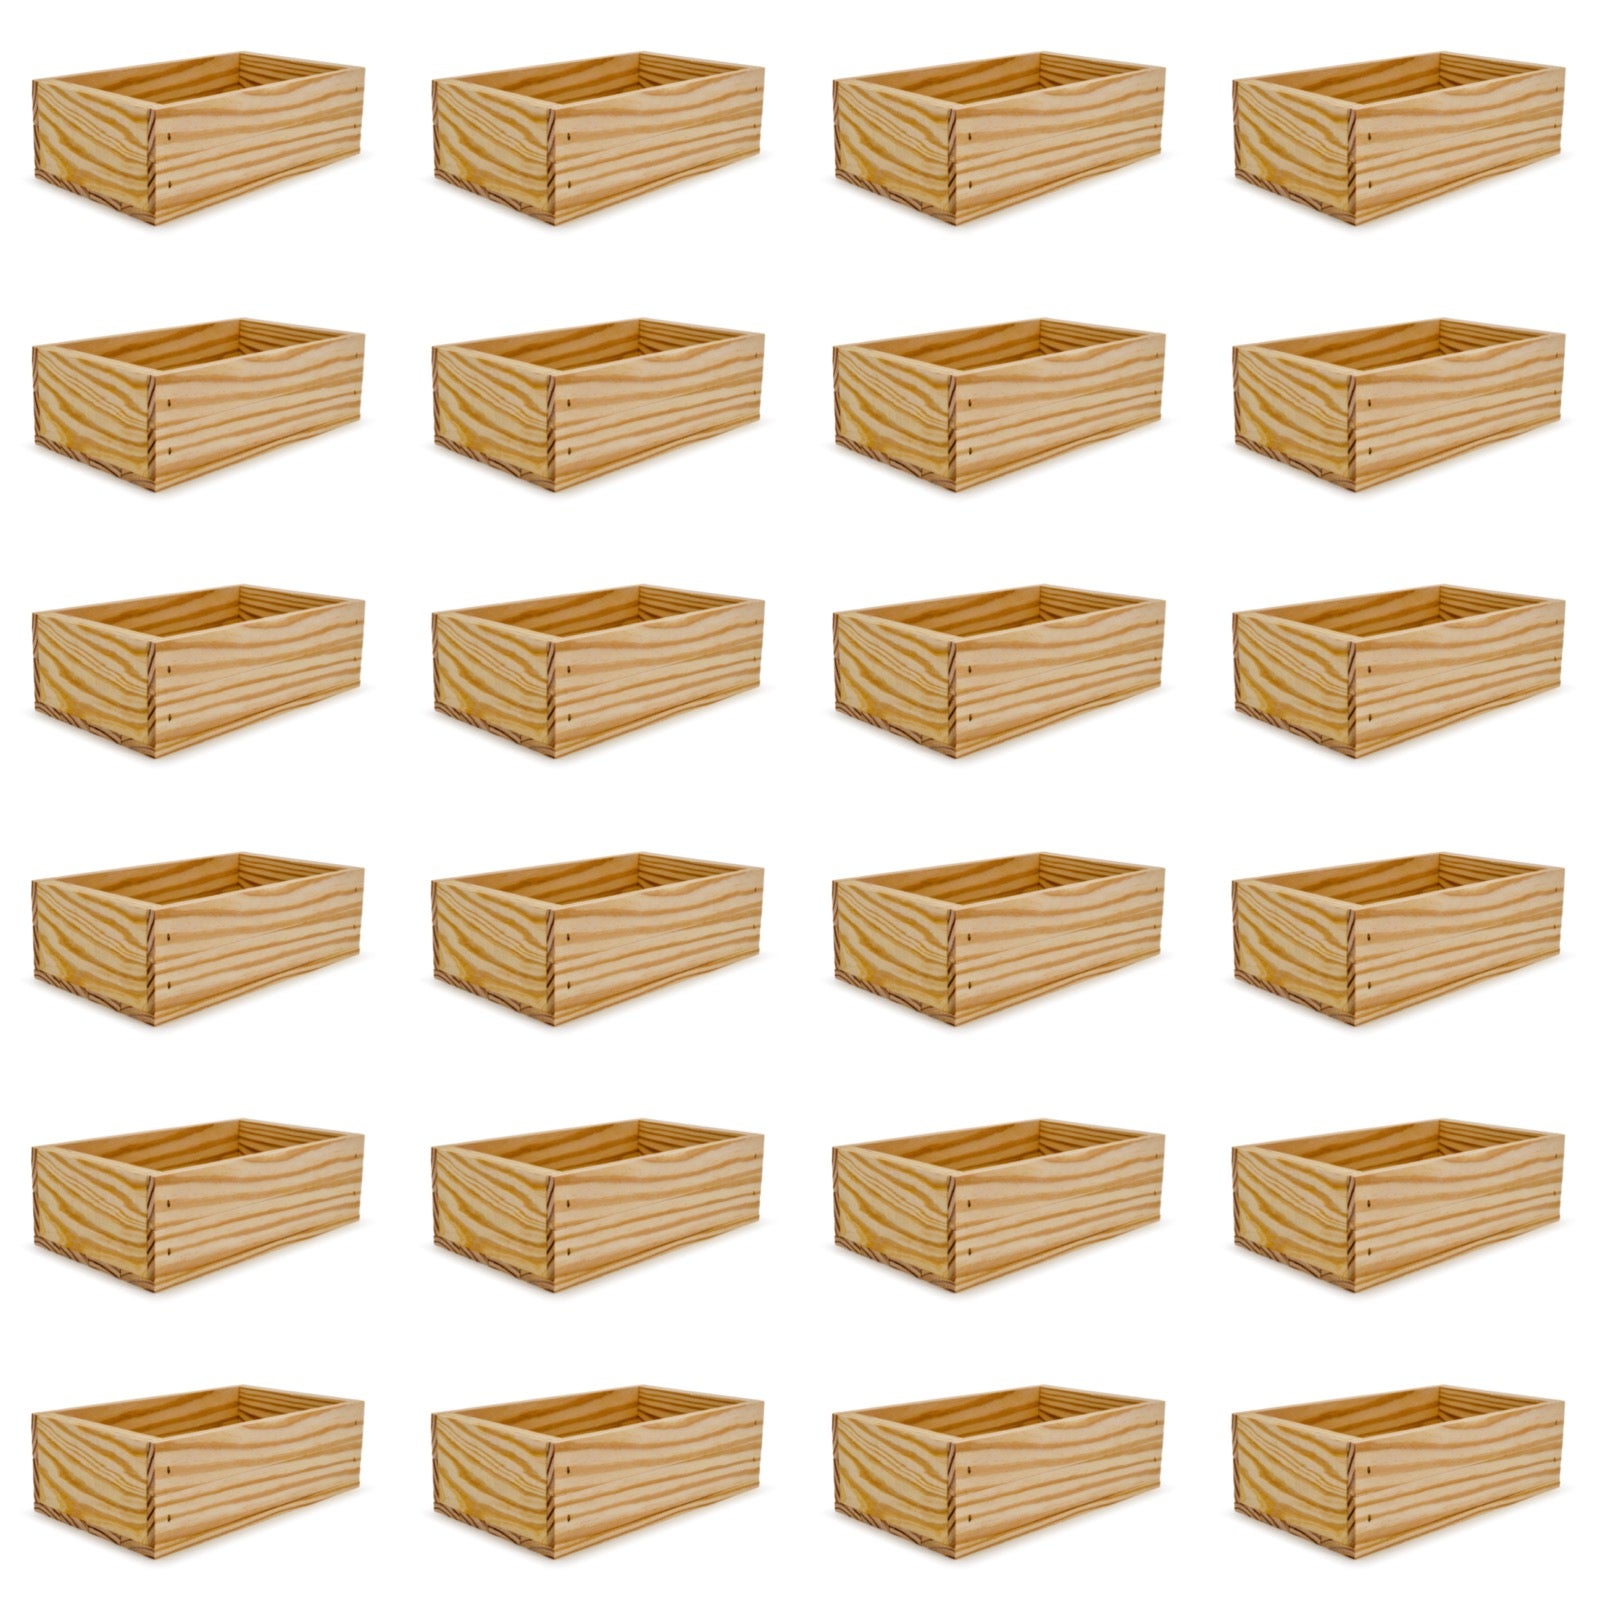 24 Small wooden crates 11x6.25x3.5